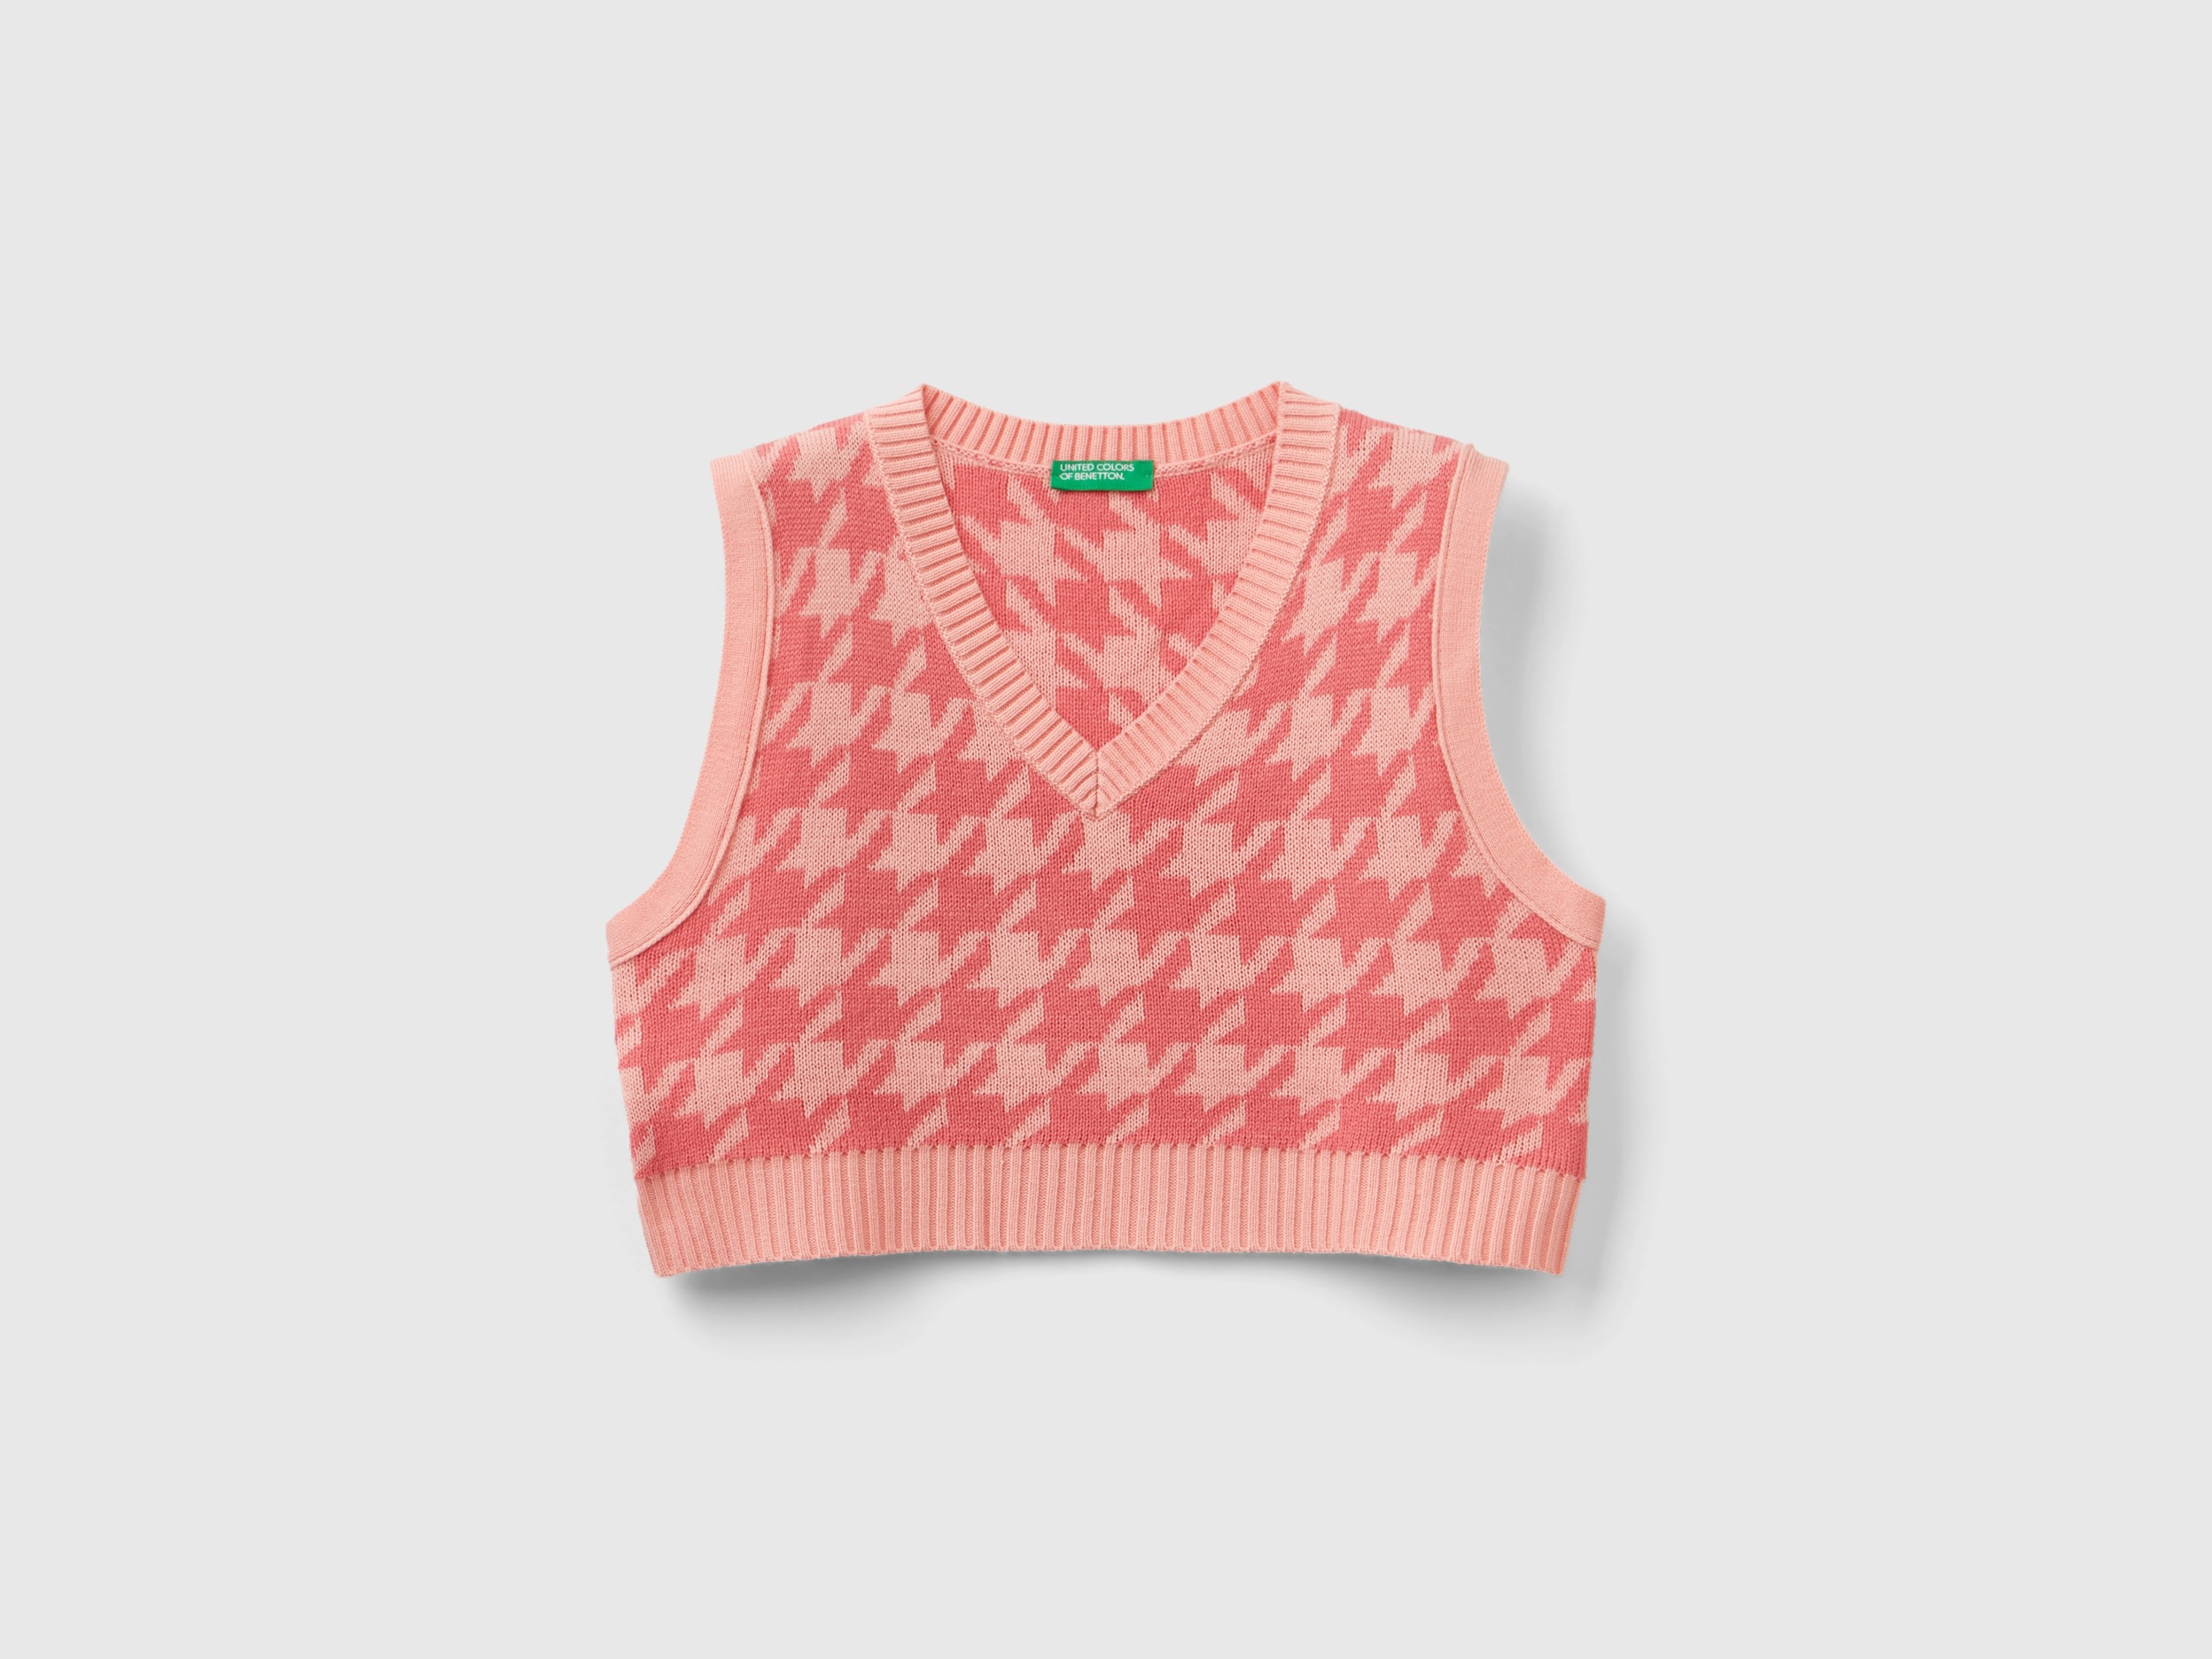 Benetton, Cropped Houndstooth Vest, size S, Pink, Kids